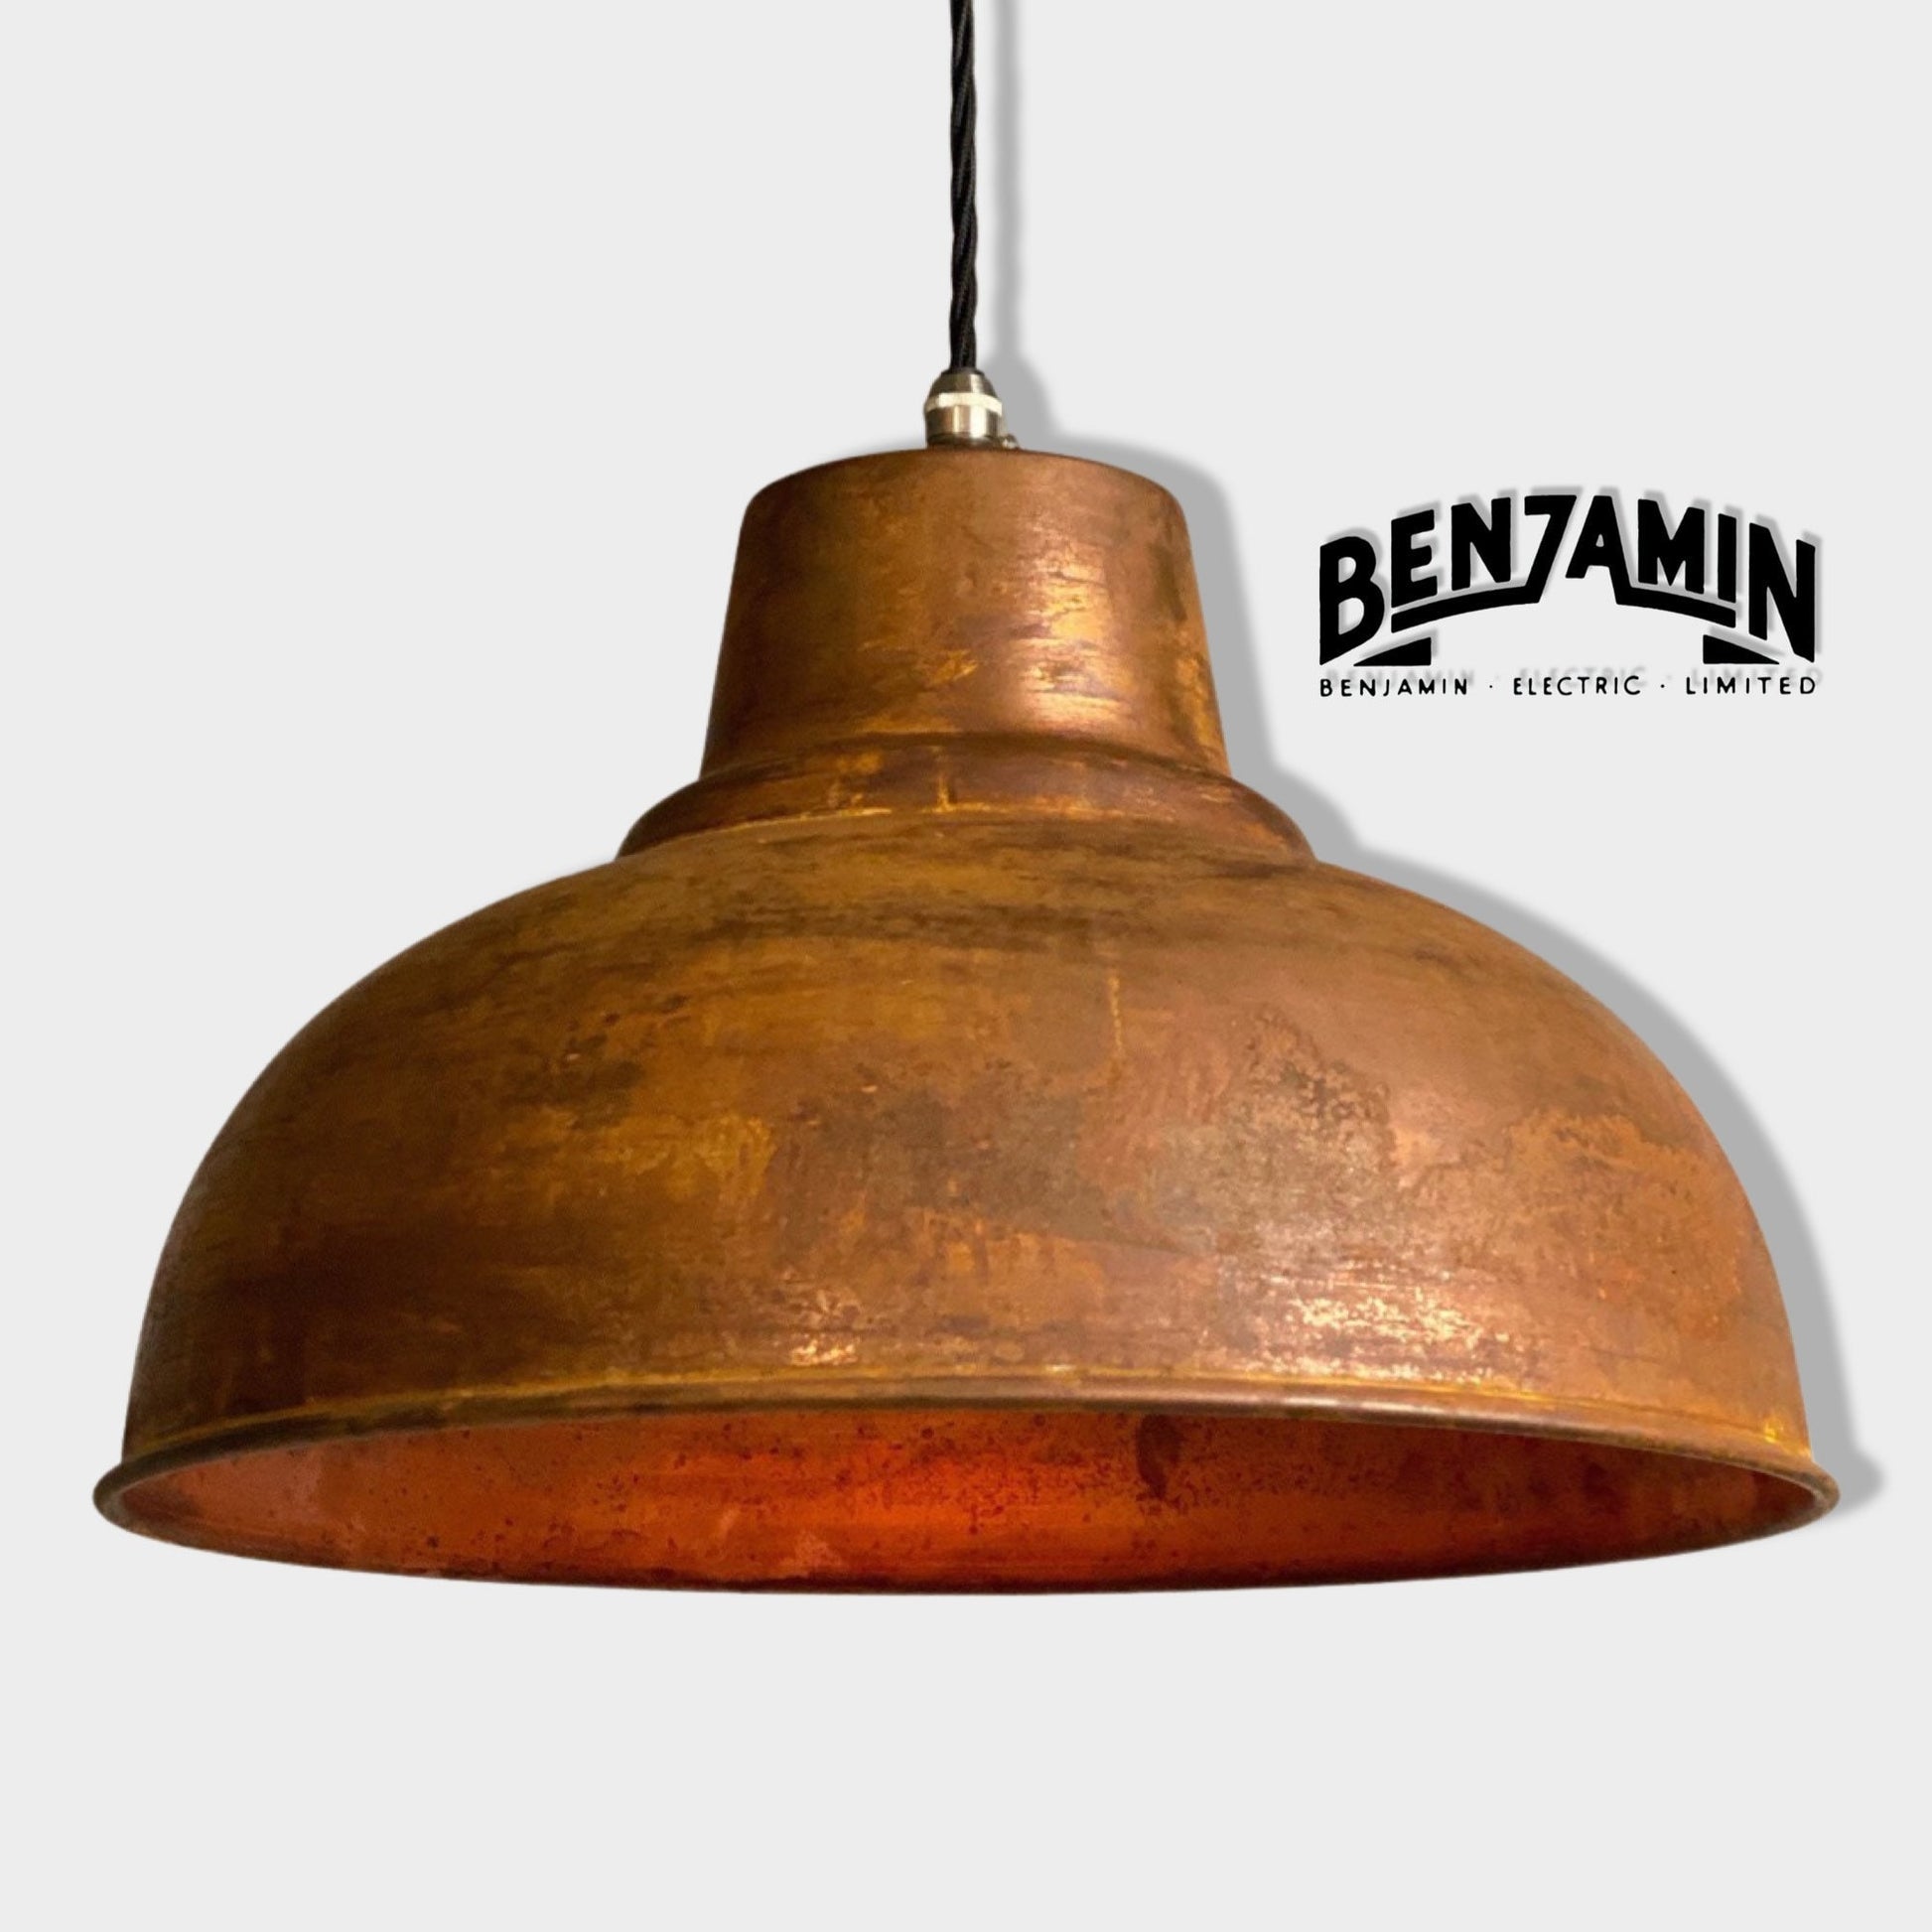 Salthouse XL ~ Genuine Rusted Solid Industrial Shade Pendant Set Light | Ceiling Dining Room | Kitchen Table | Vintage Bulb 14.5 Inch